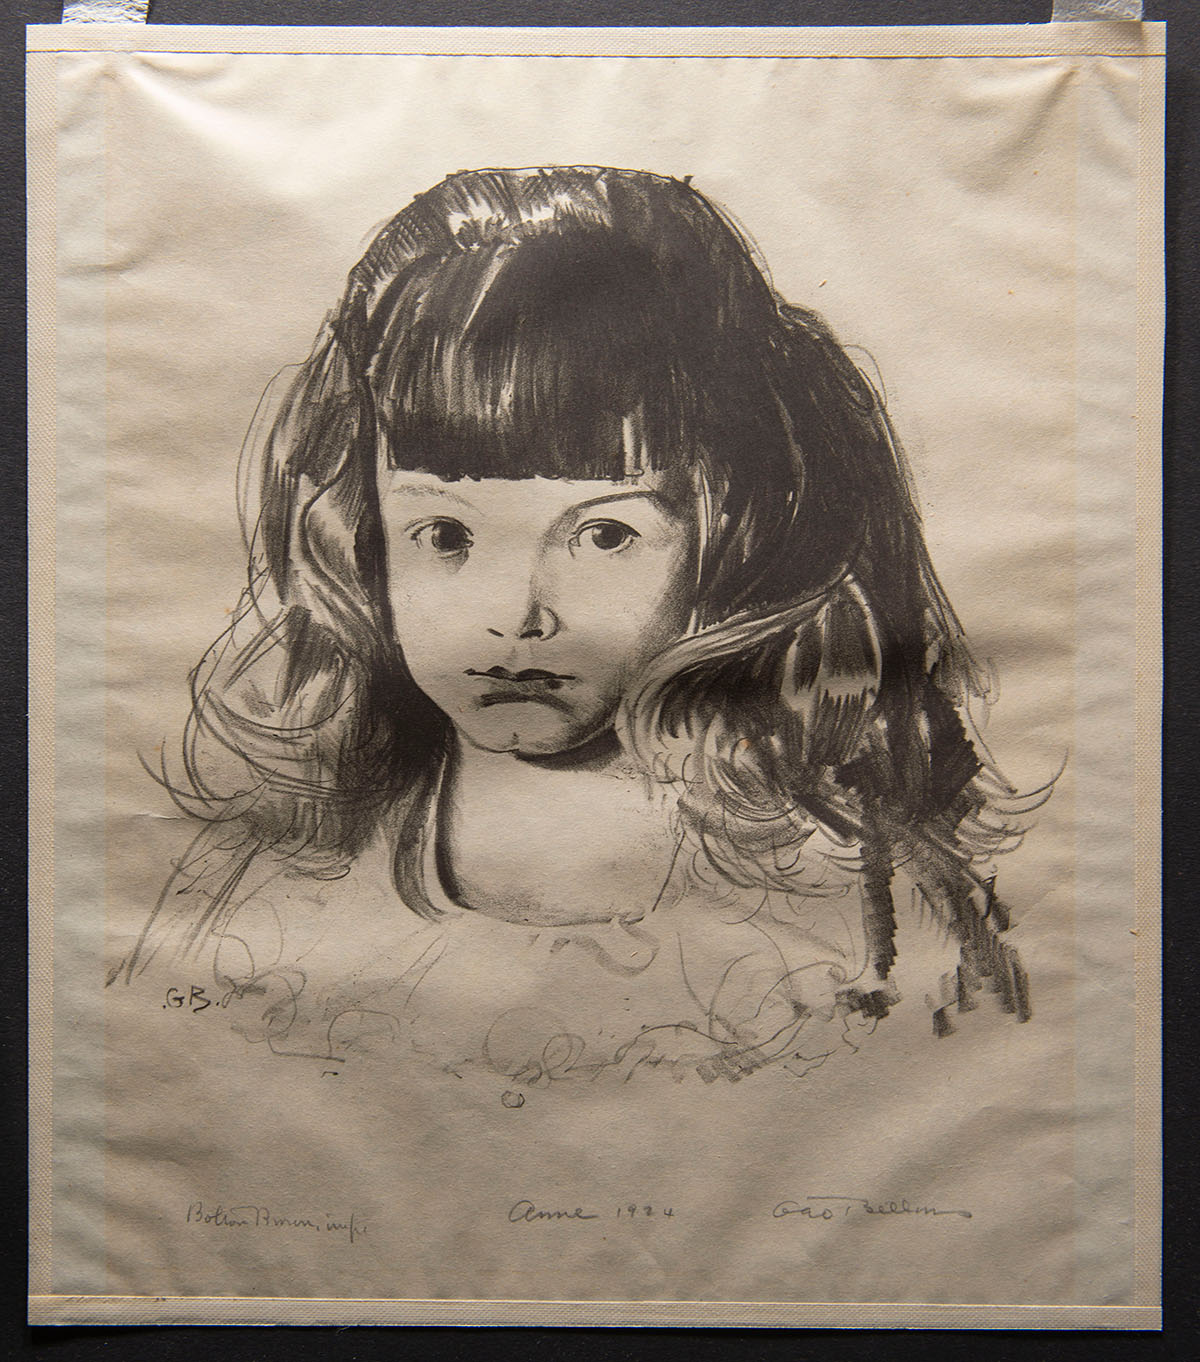 A simple illustration of a young girl. The paper is rumpled.